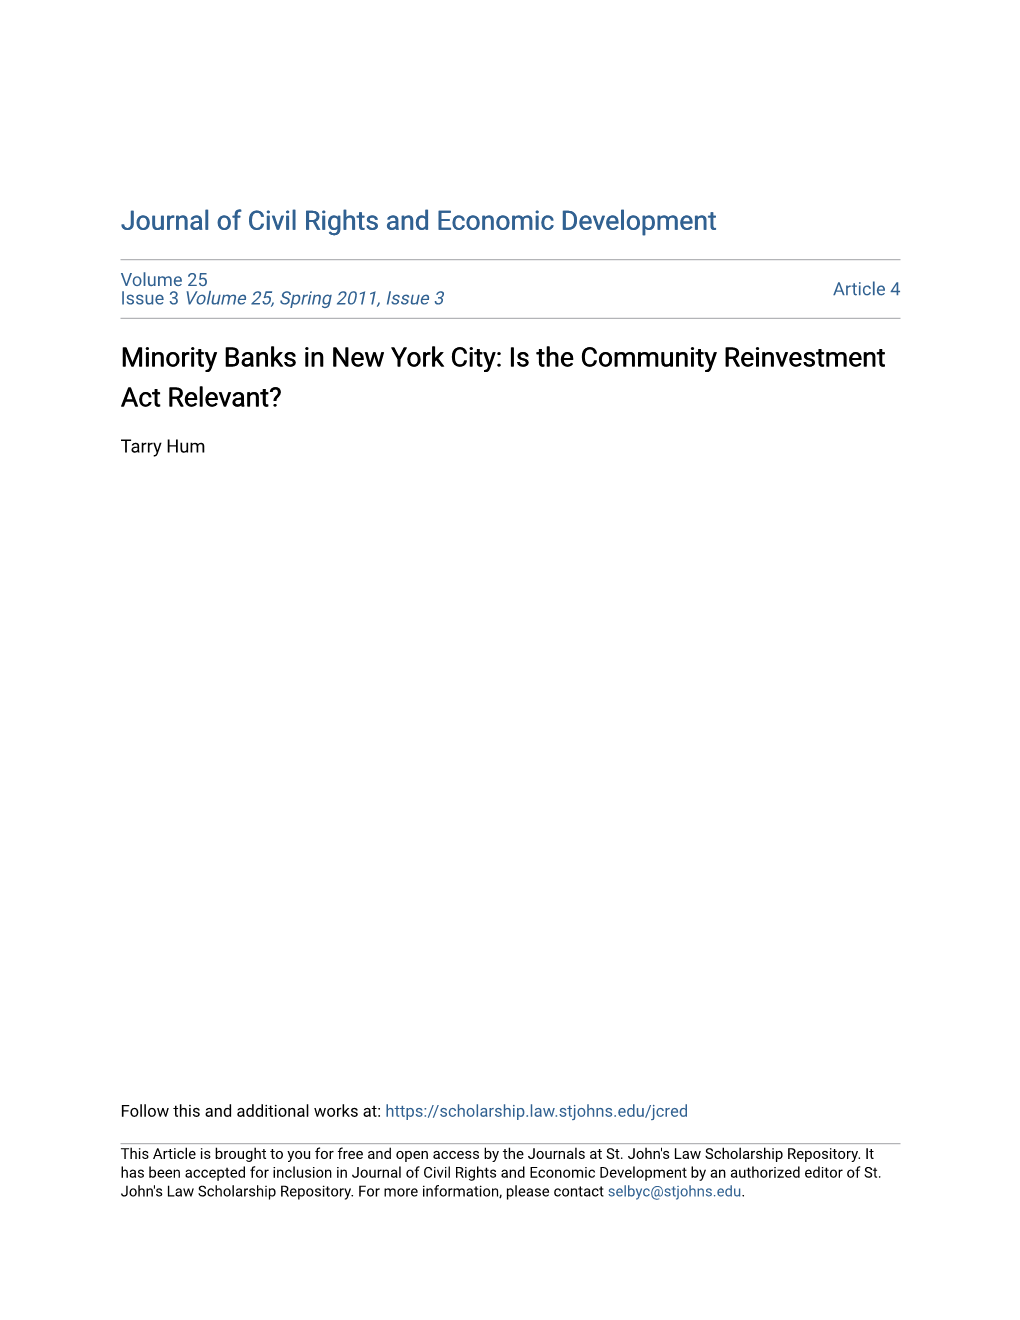 Minority Banks in New York City: Is the Community Reinvestment Act Relevant?